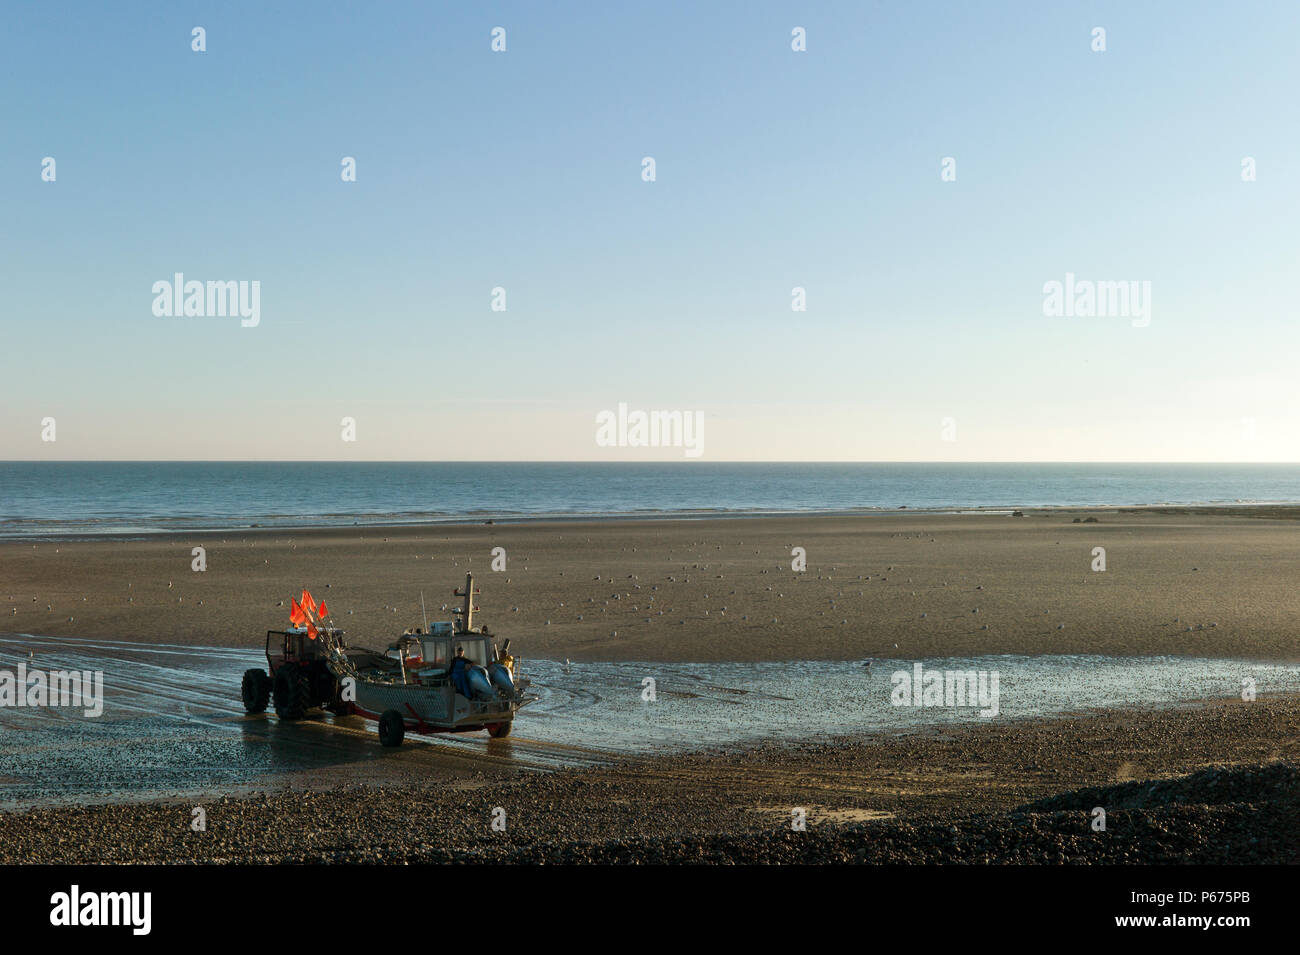 Small fishing boat being towed by tractor to launch, Normandy, France Stock Photo